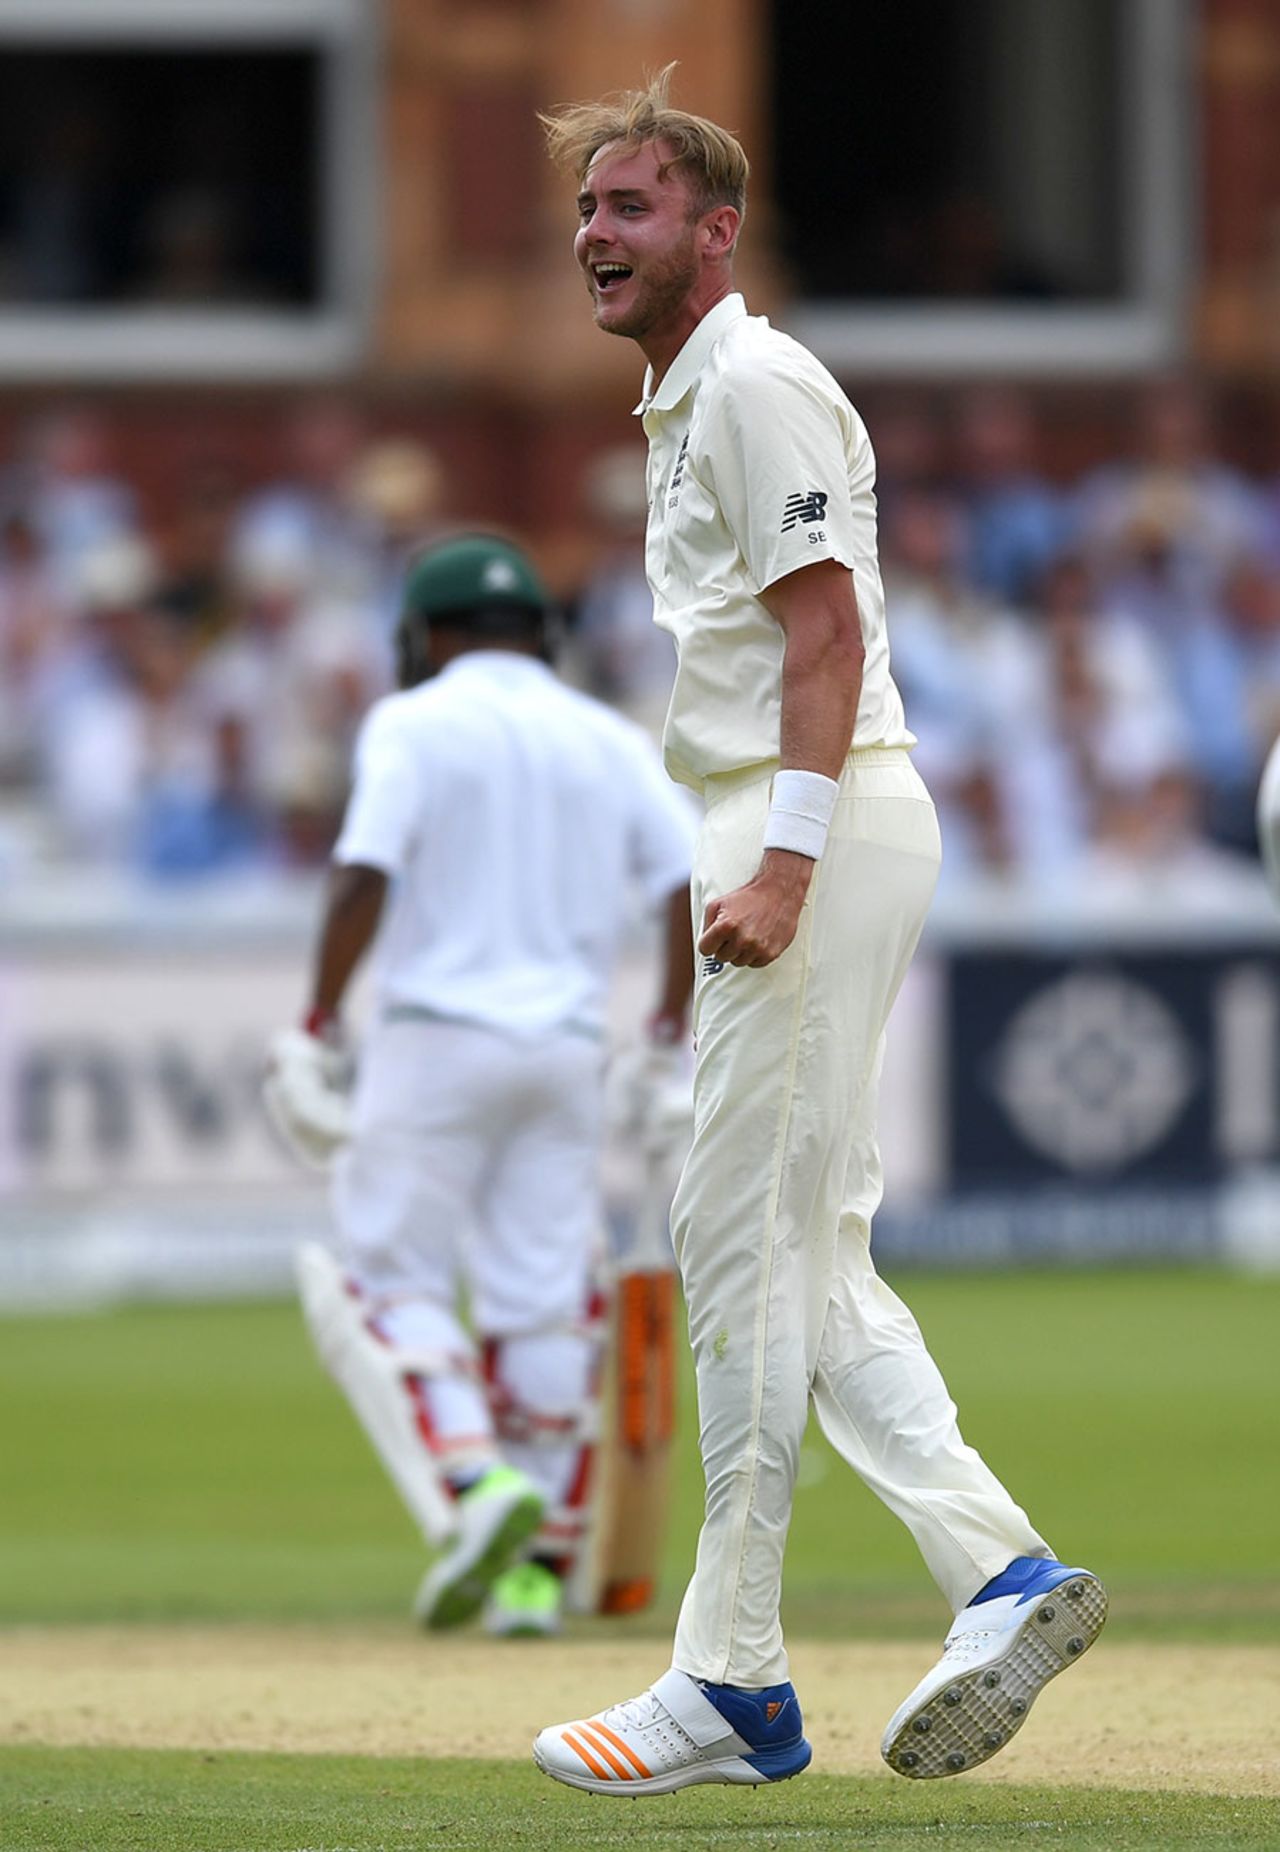 Stuart Broad trapped JP Duminy after tea, England v South Africa, 1st Investec Test, Lord's, 2nd day, July 7, 2017